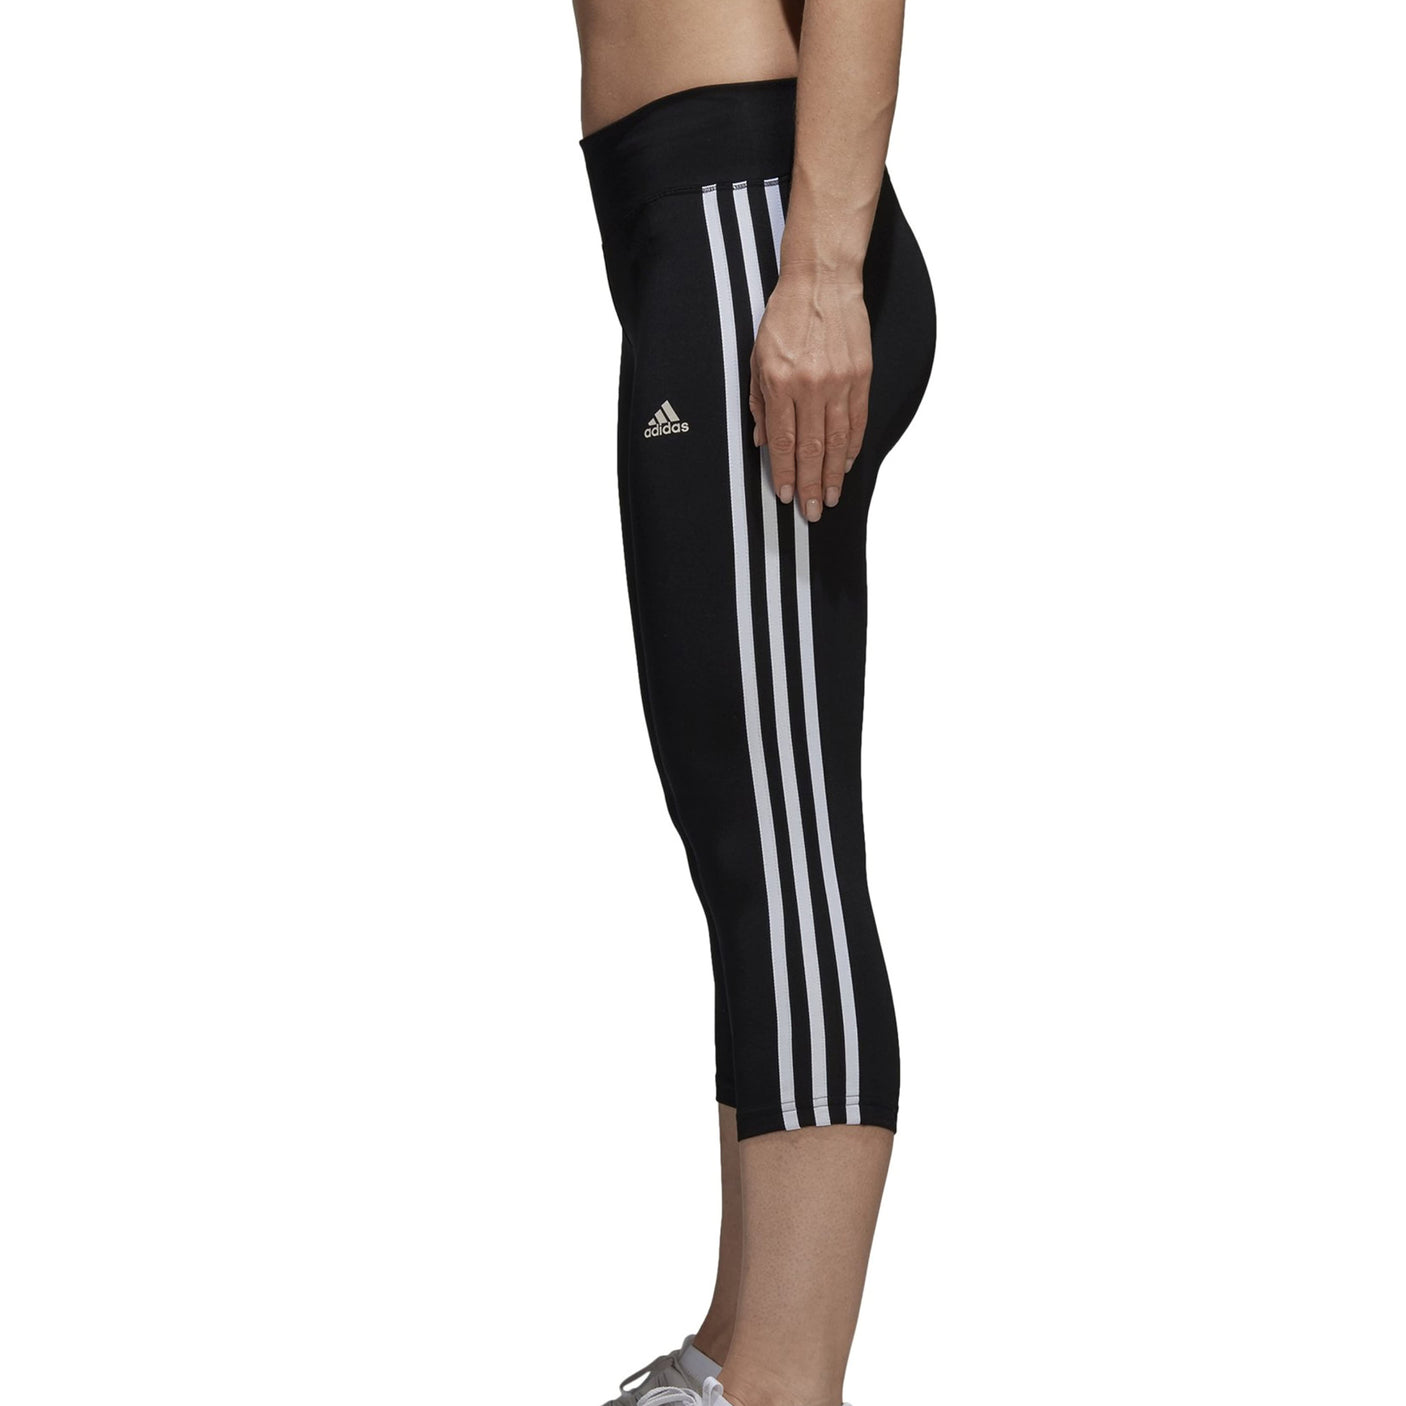 Adidas Womens Designed 2 Move 3/4 Tights Black/White Side